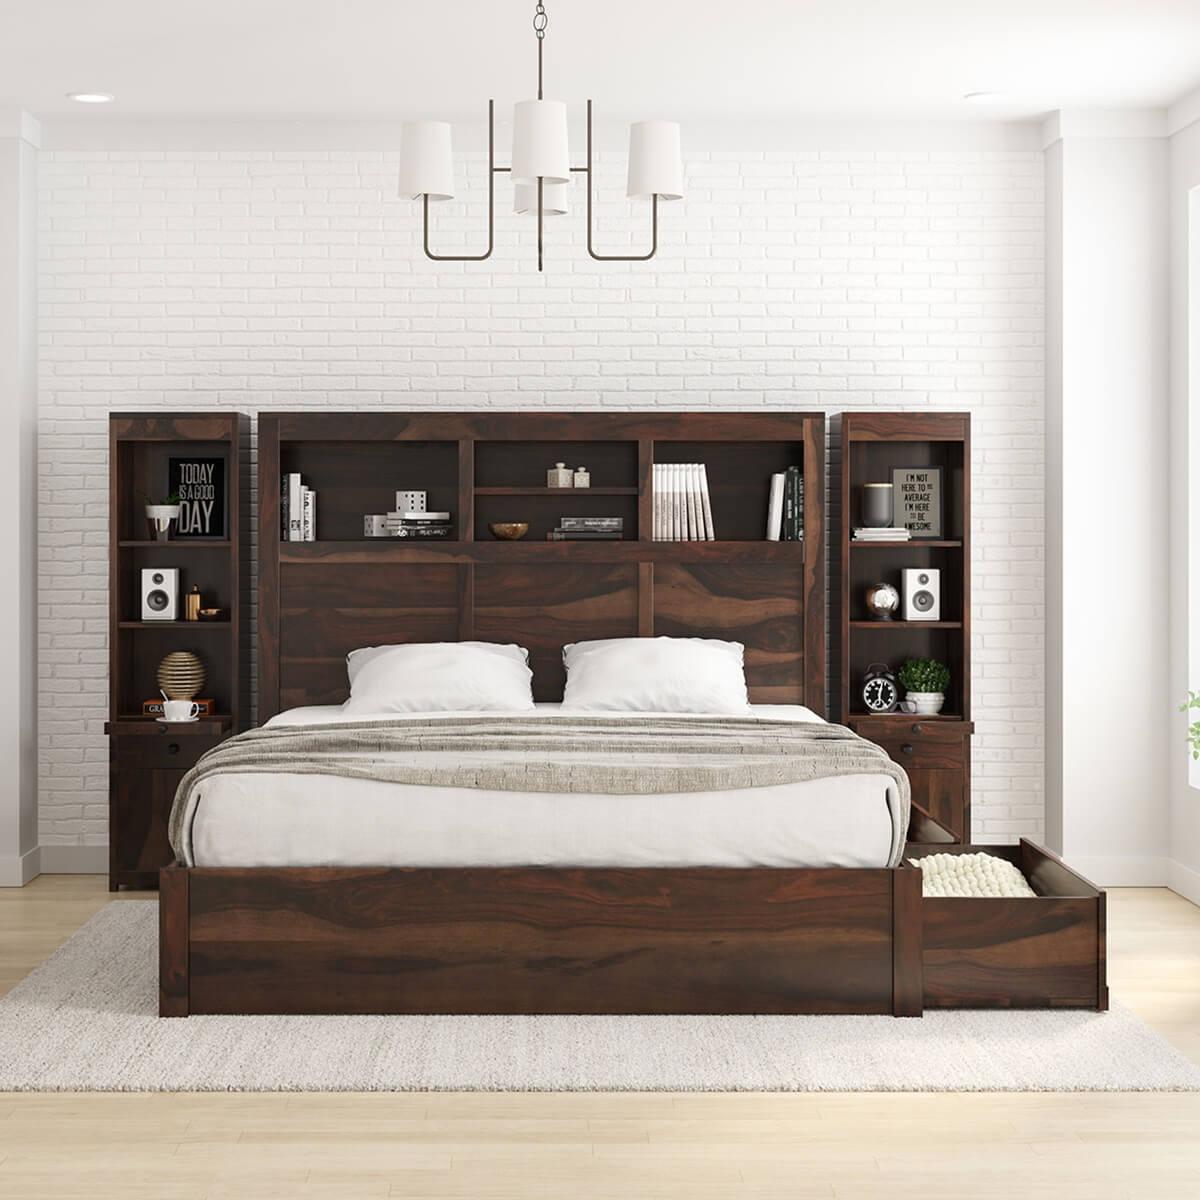 How To Attach A Headboard Any Bed, Can You Attach A Wooden Headboard To Metal Frame